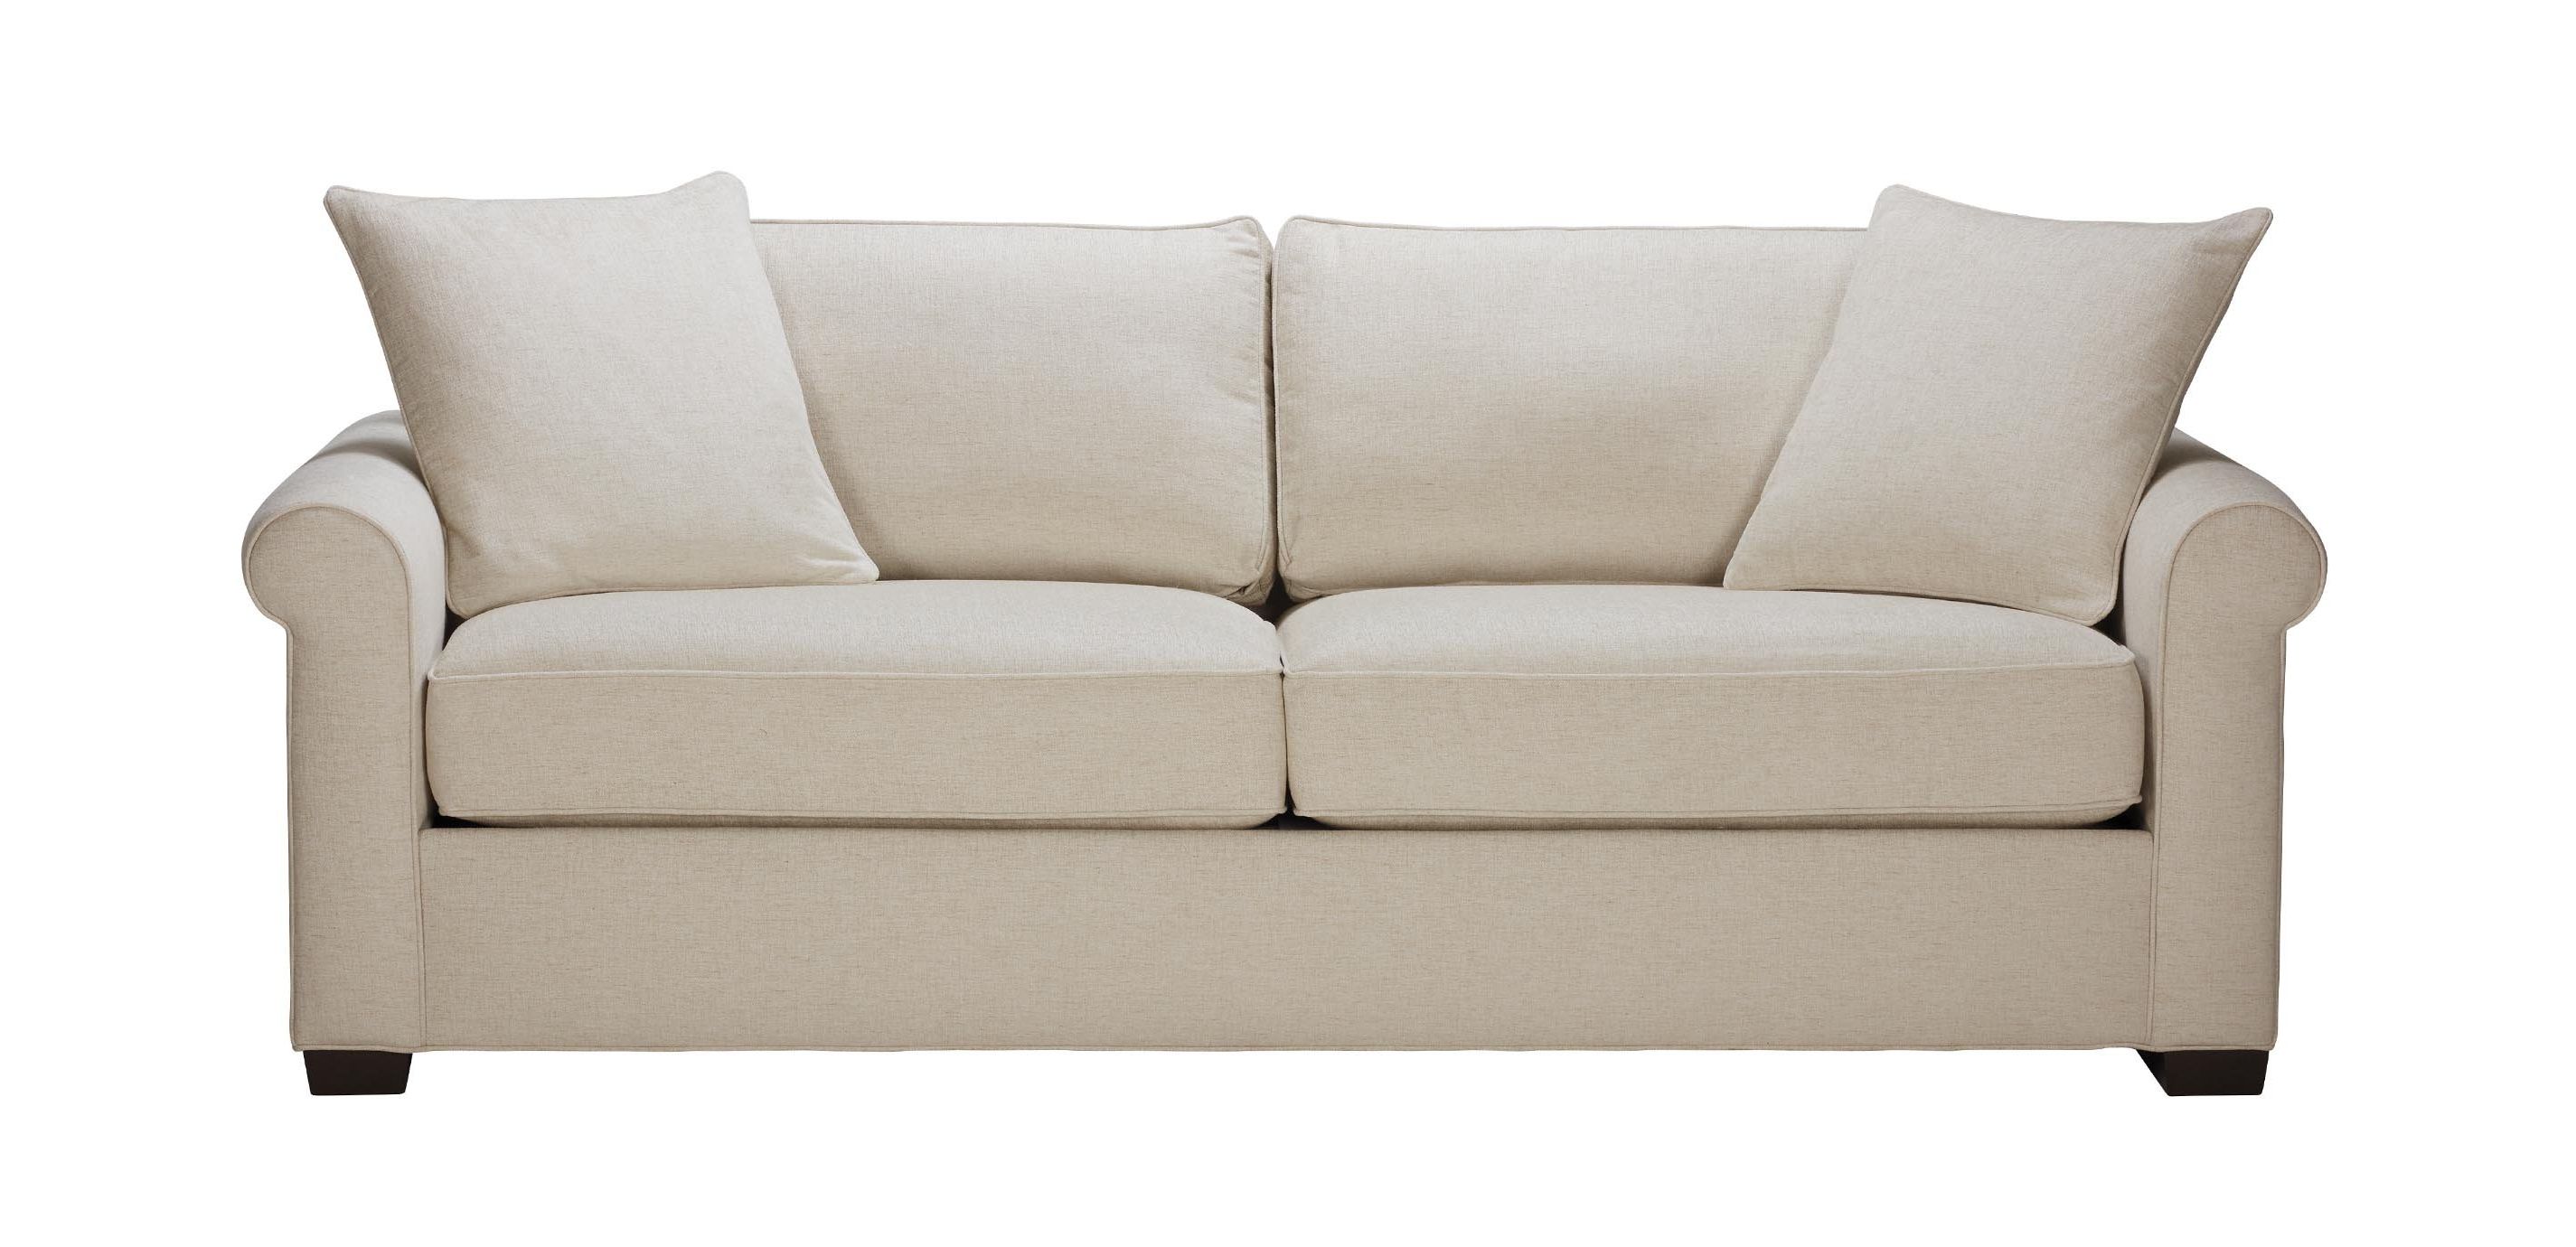 Spencer Roll Arm Sofa, Ready To Ship | Fast Delivery Sofa | Ethan Allen With Regard To Sofas With Rolled Arm (Gallery 1 of 20)